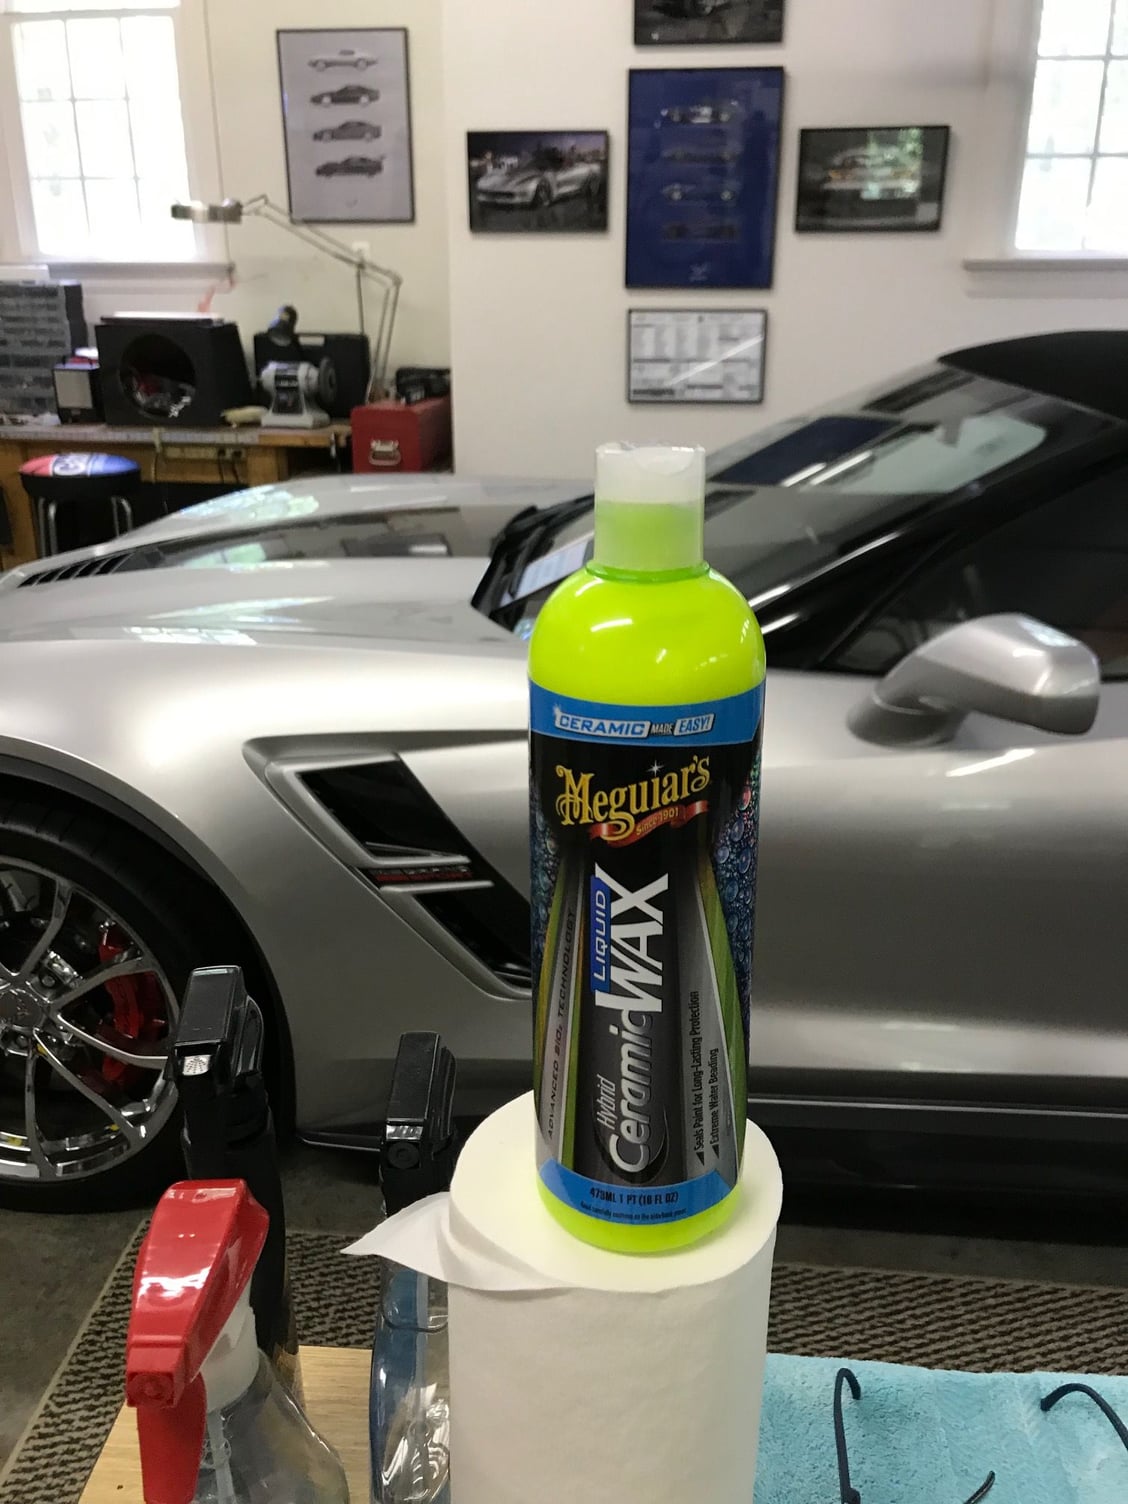 Why Does Meguiar's Make So Many Different Waxes?